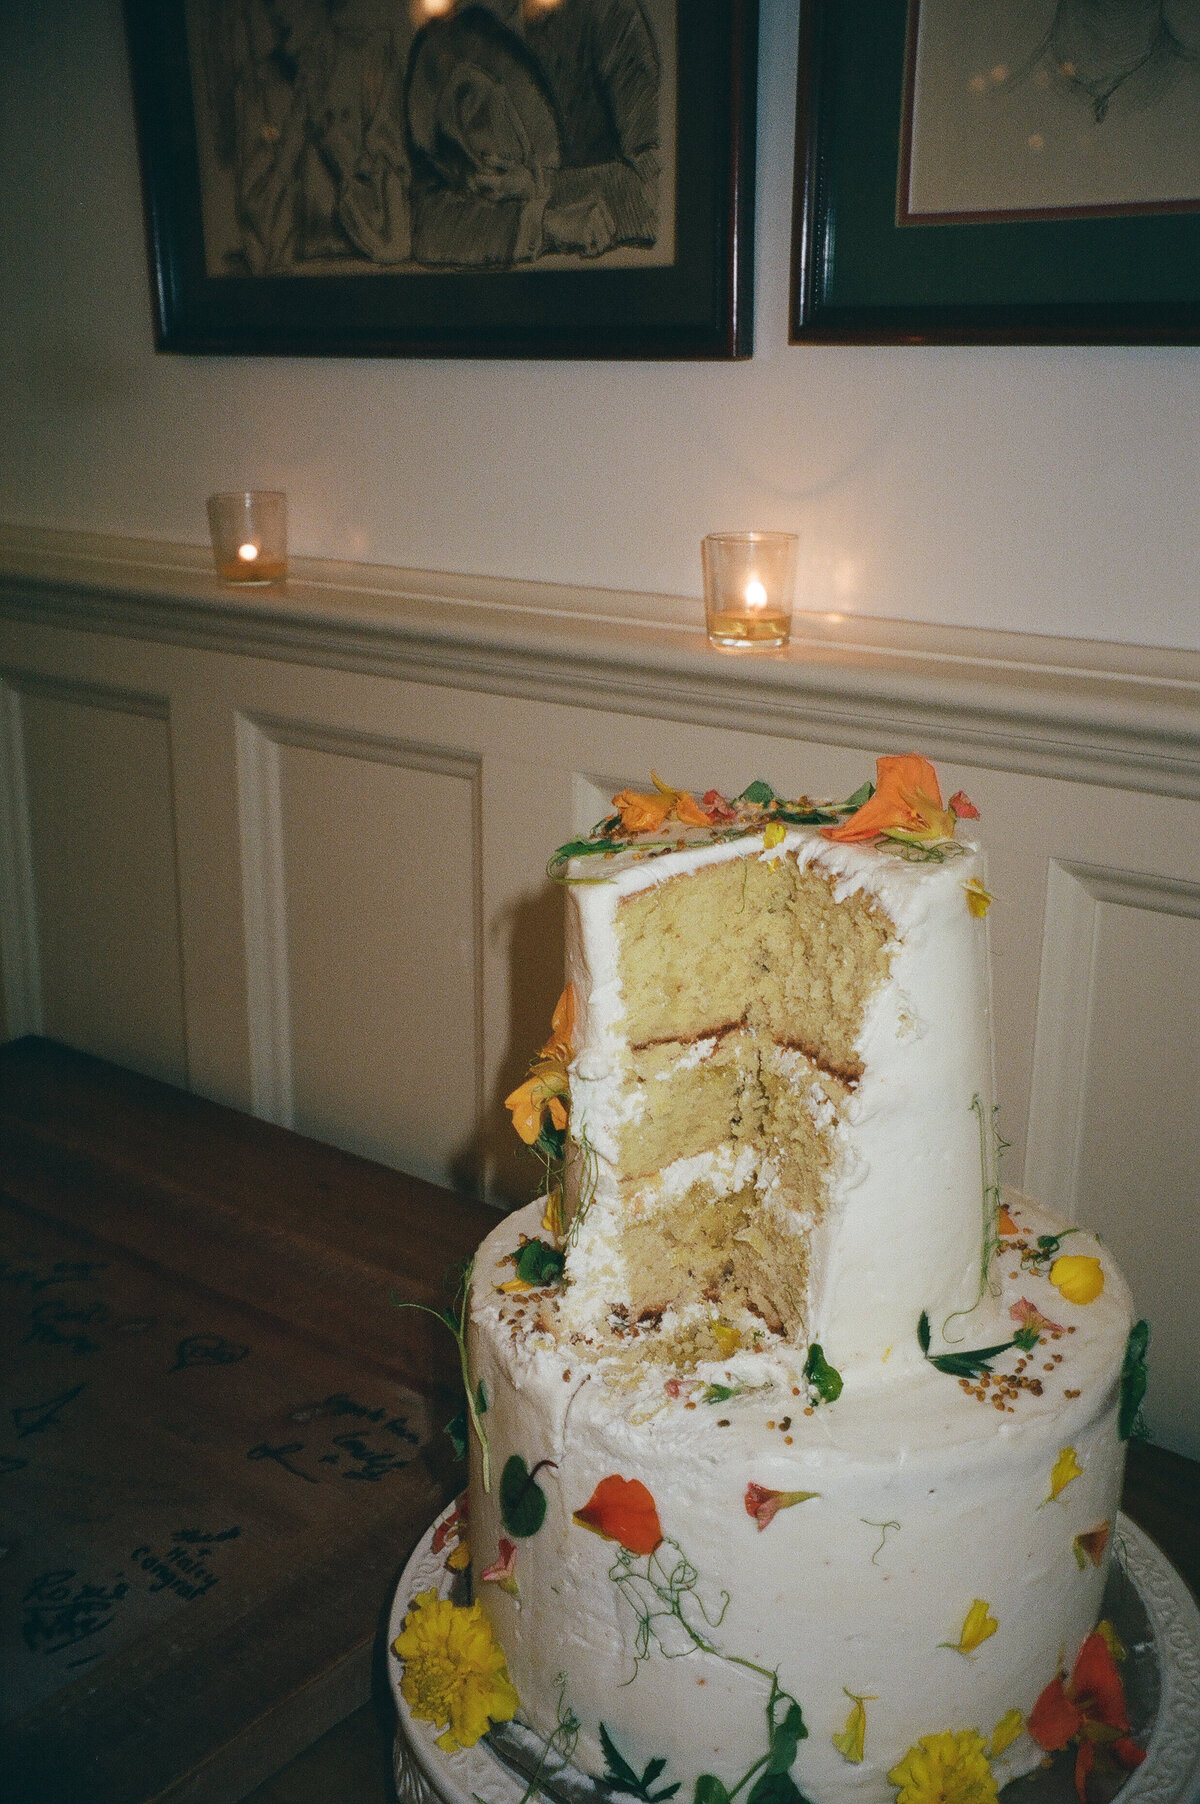 Film image of a wedding cake that has been cut at the Atlantic Inn